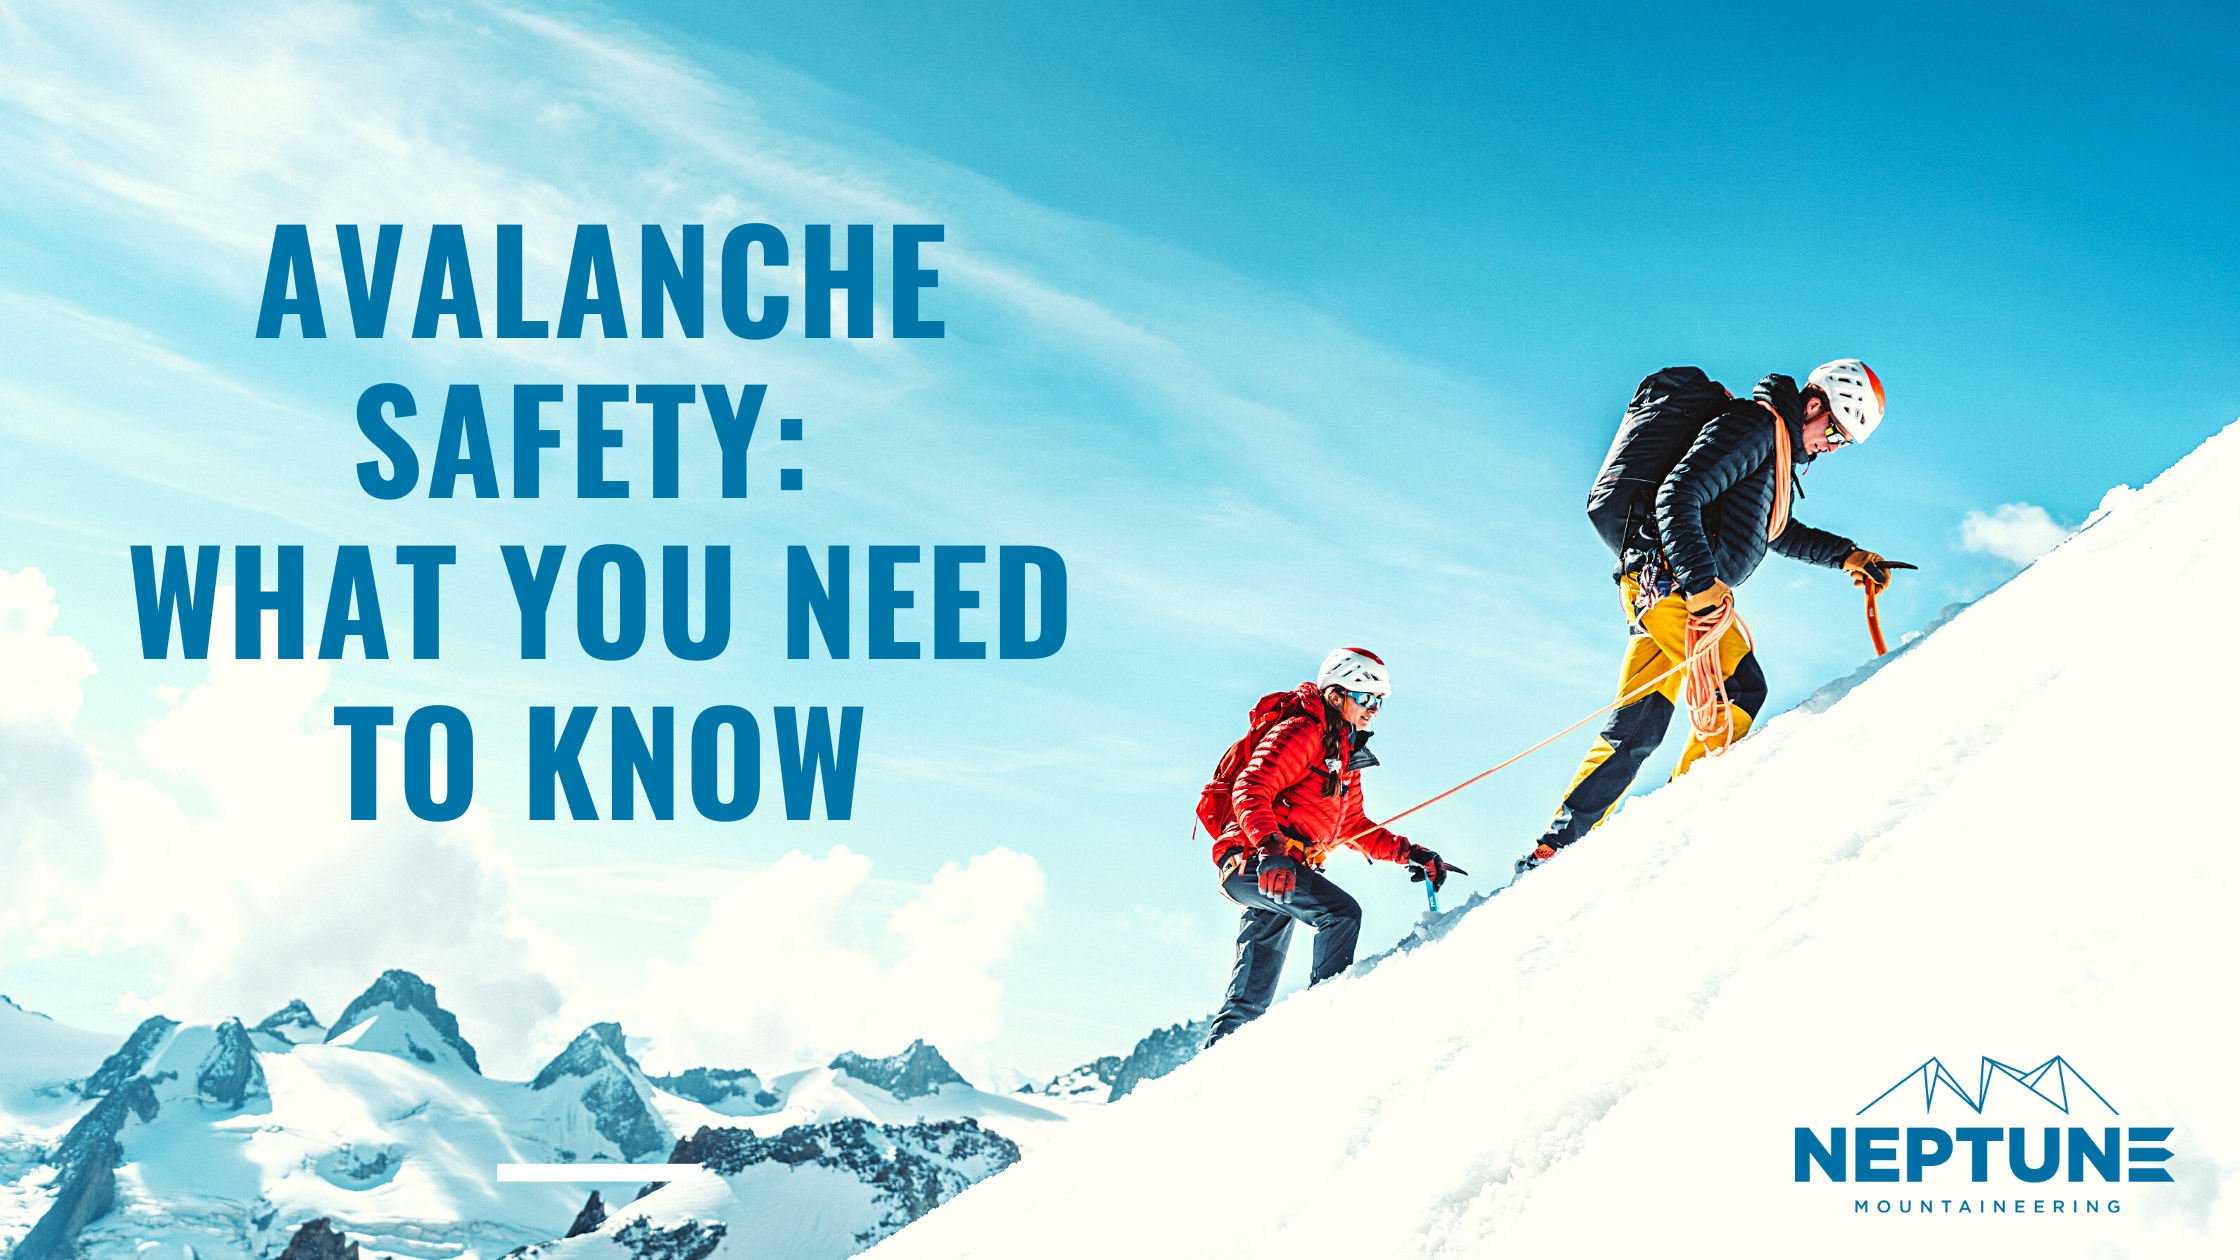 How to be Avalanche Safe in the Backcountry Near Bend — Bend Magazine